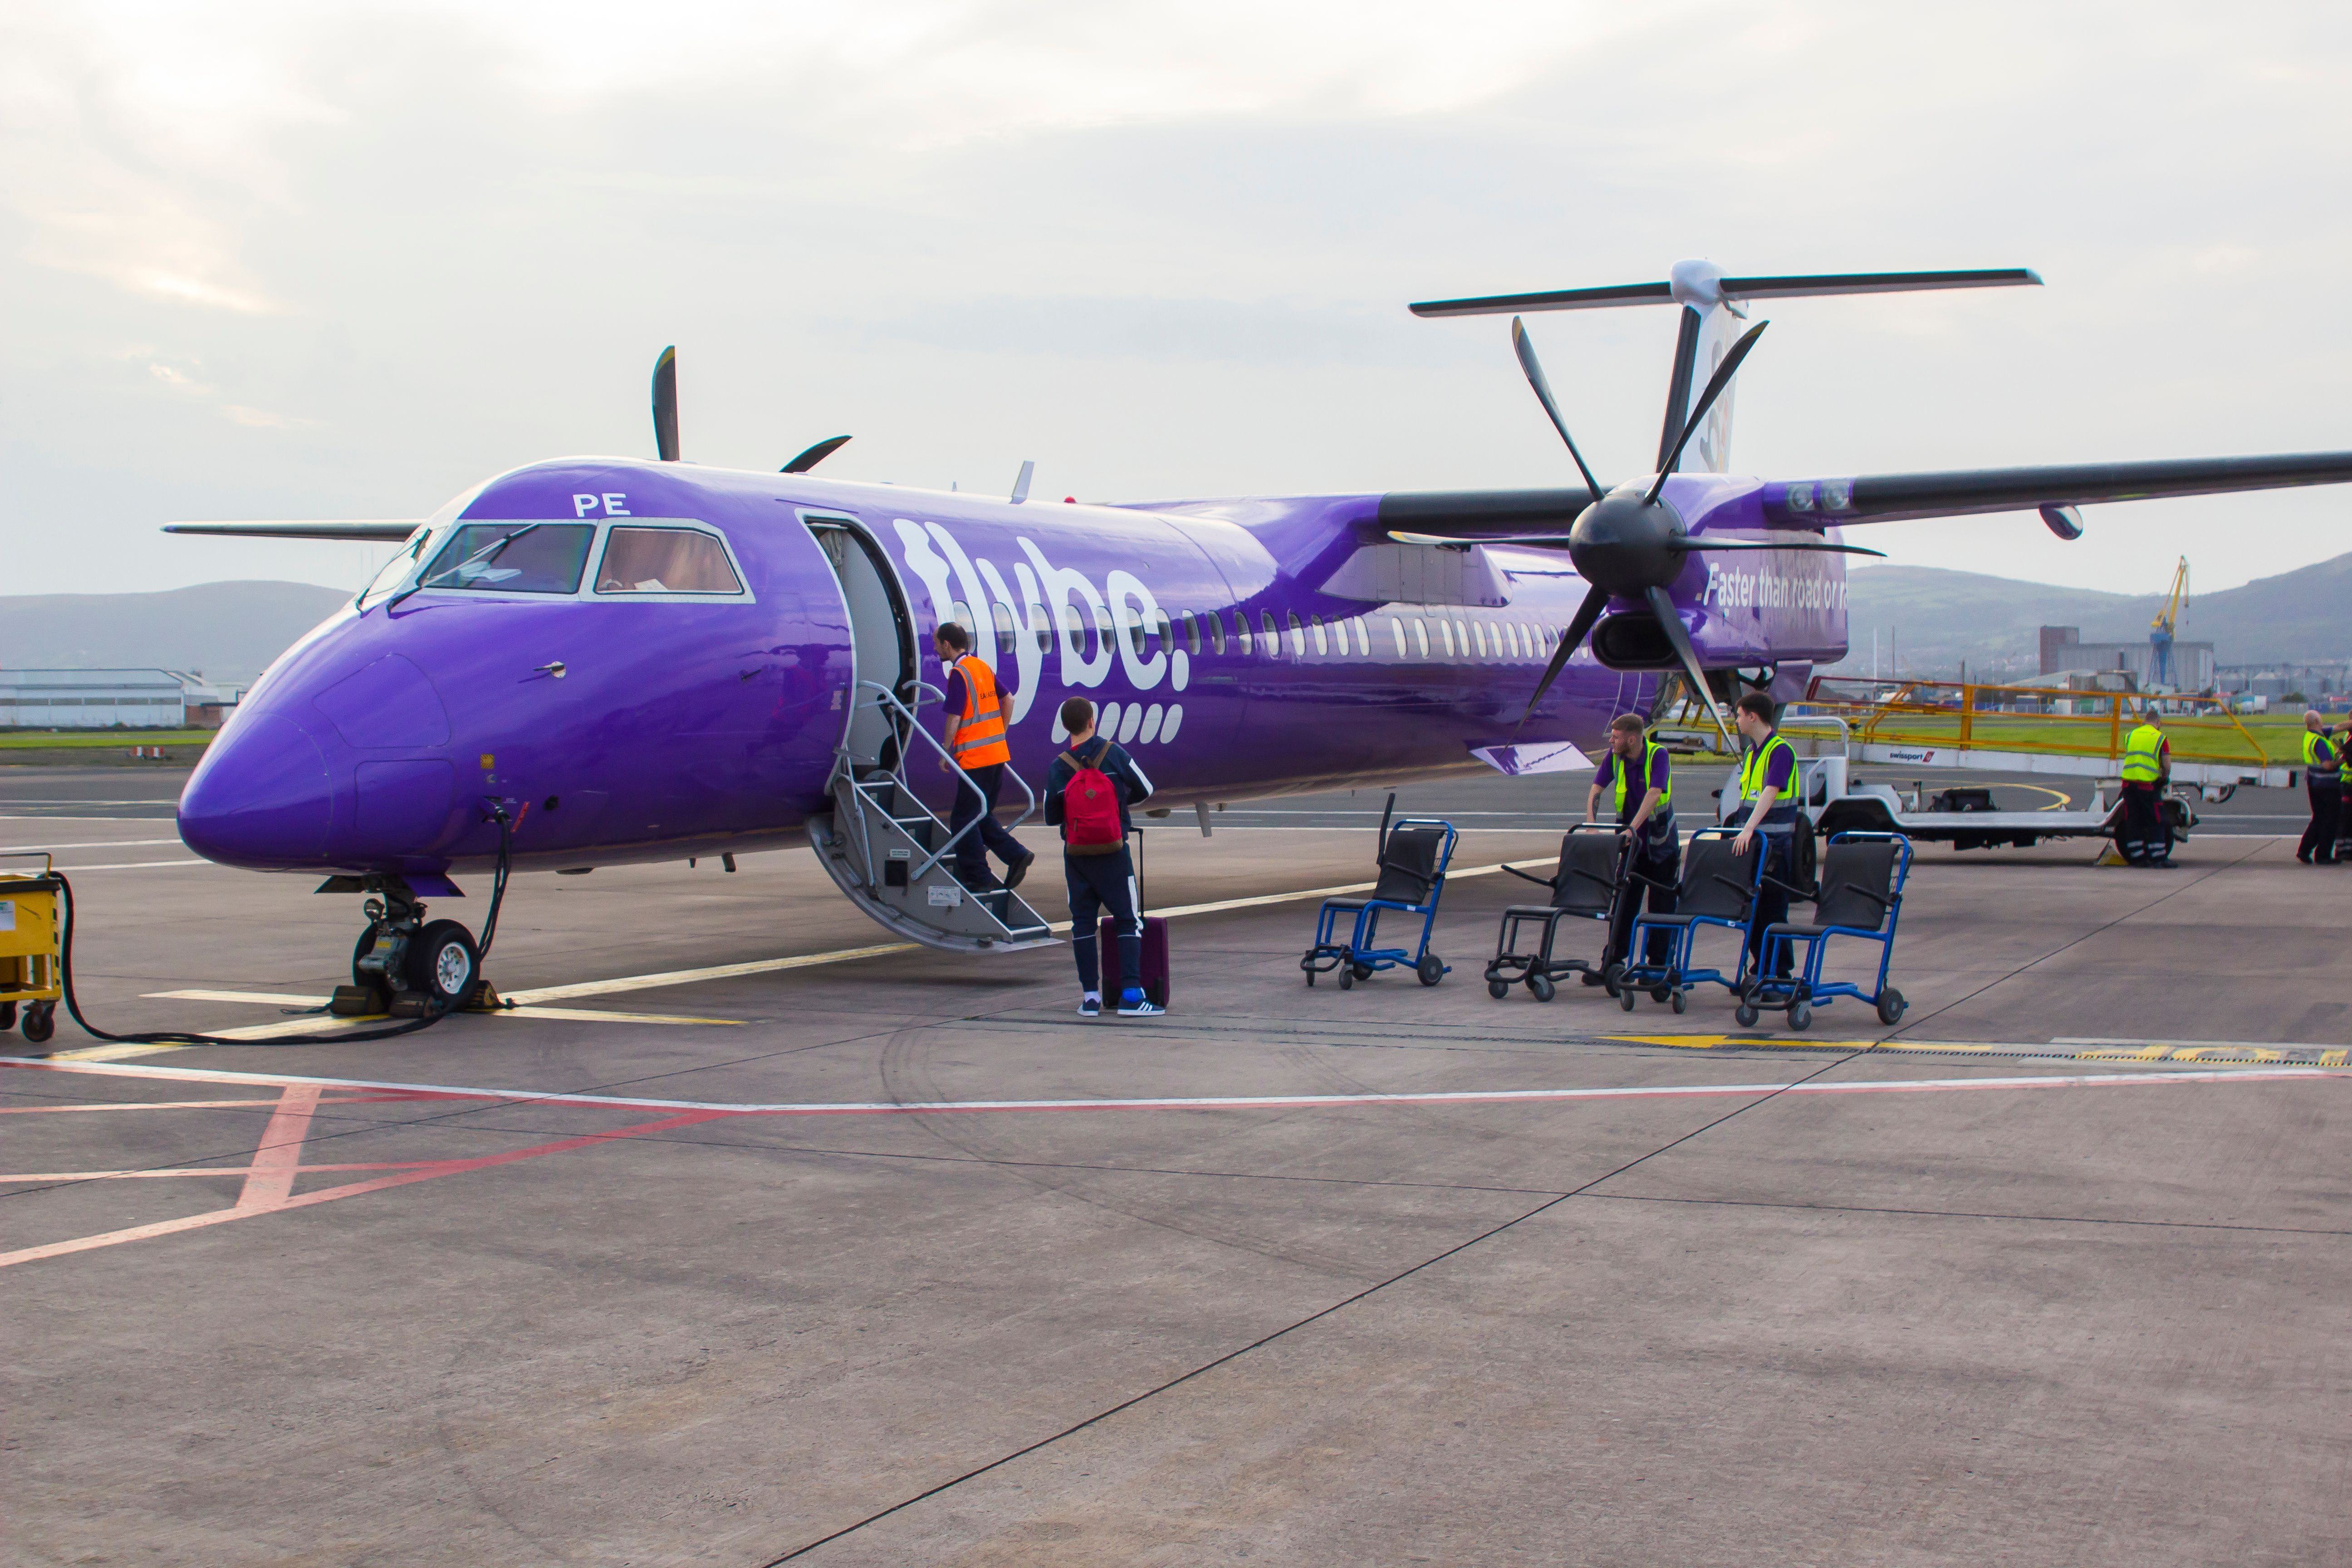 21 September 2019 A FlyBe Dash 8 Commercial Airliner with luggage and passenger handlers on the apron at George Best City Airport in Belfast Northern Ireland